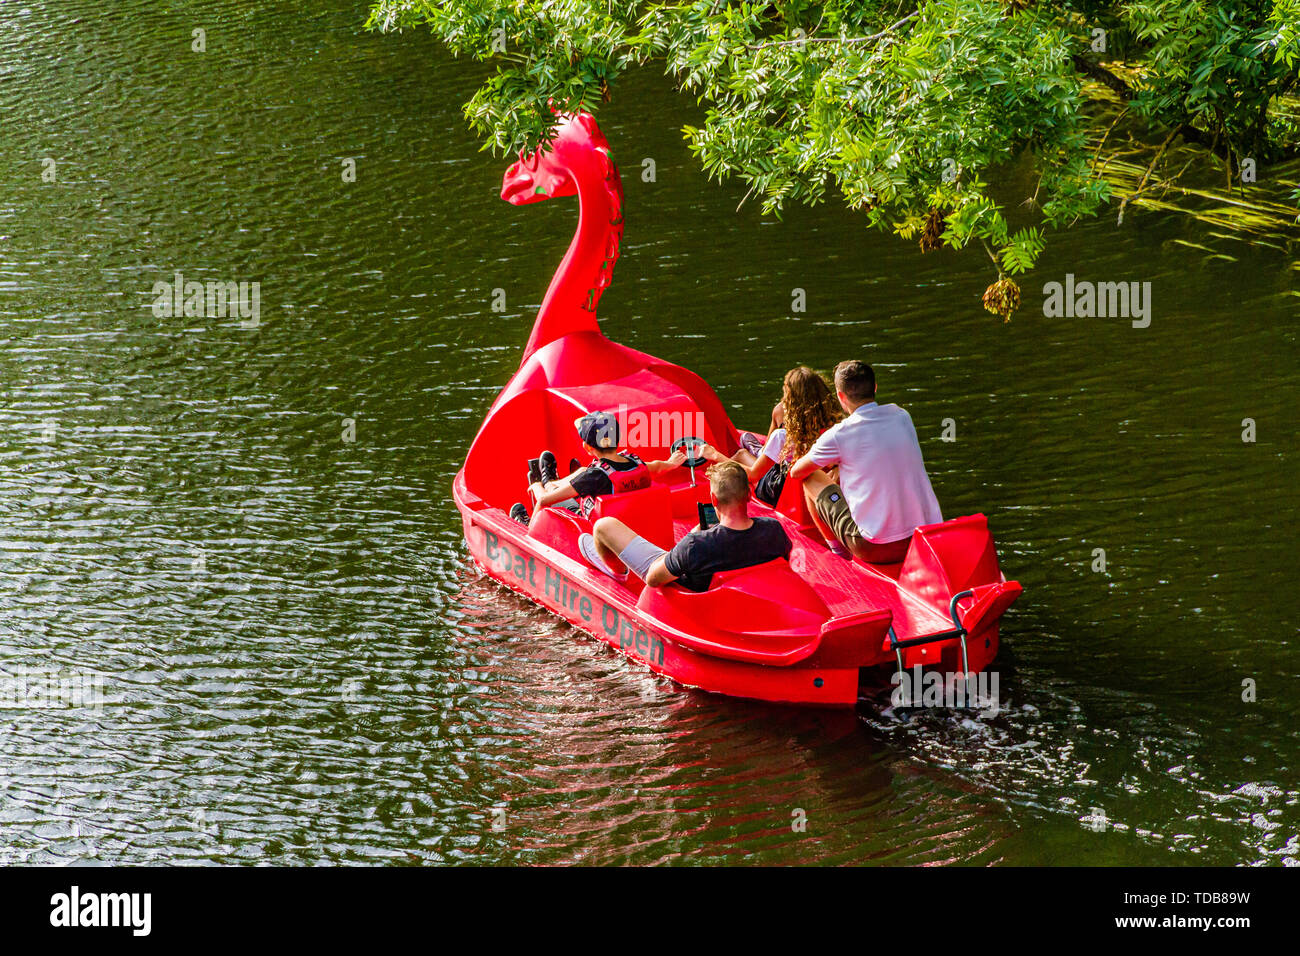 A brightly coloured dragon shaped pedalo on the River Avon, Warwick, Warwickshire. Summer 2018. Stock Photo